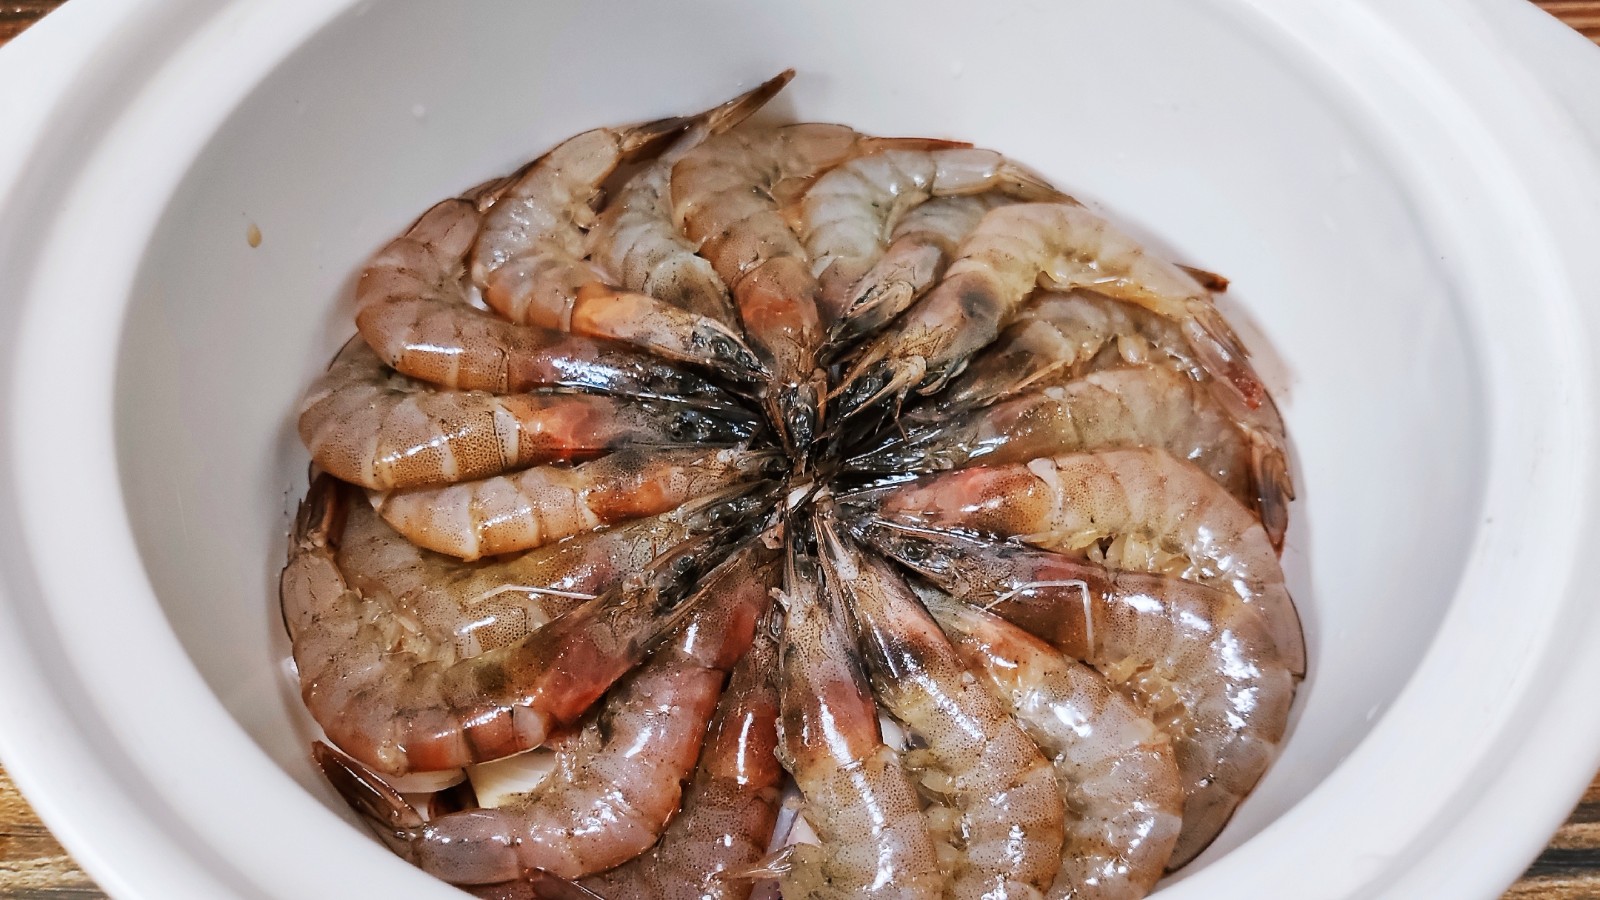 Shrimp is a new way to eat, without steaming or boiling, without putting a drop of oil, the pot smells good all over the house. It's delicious.